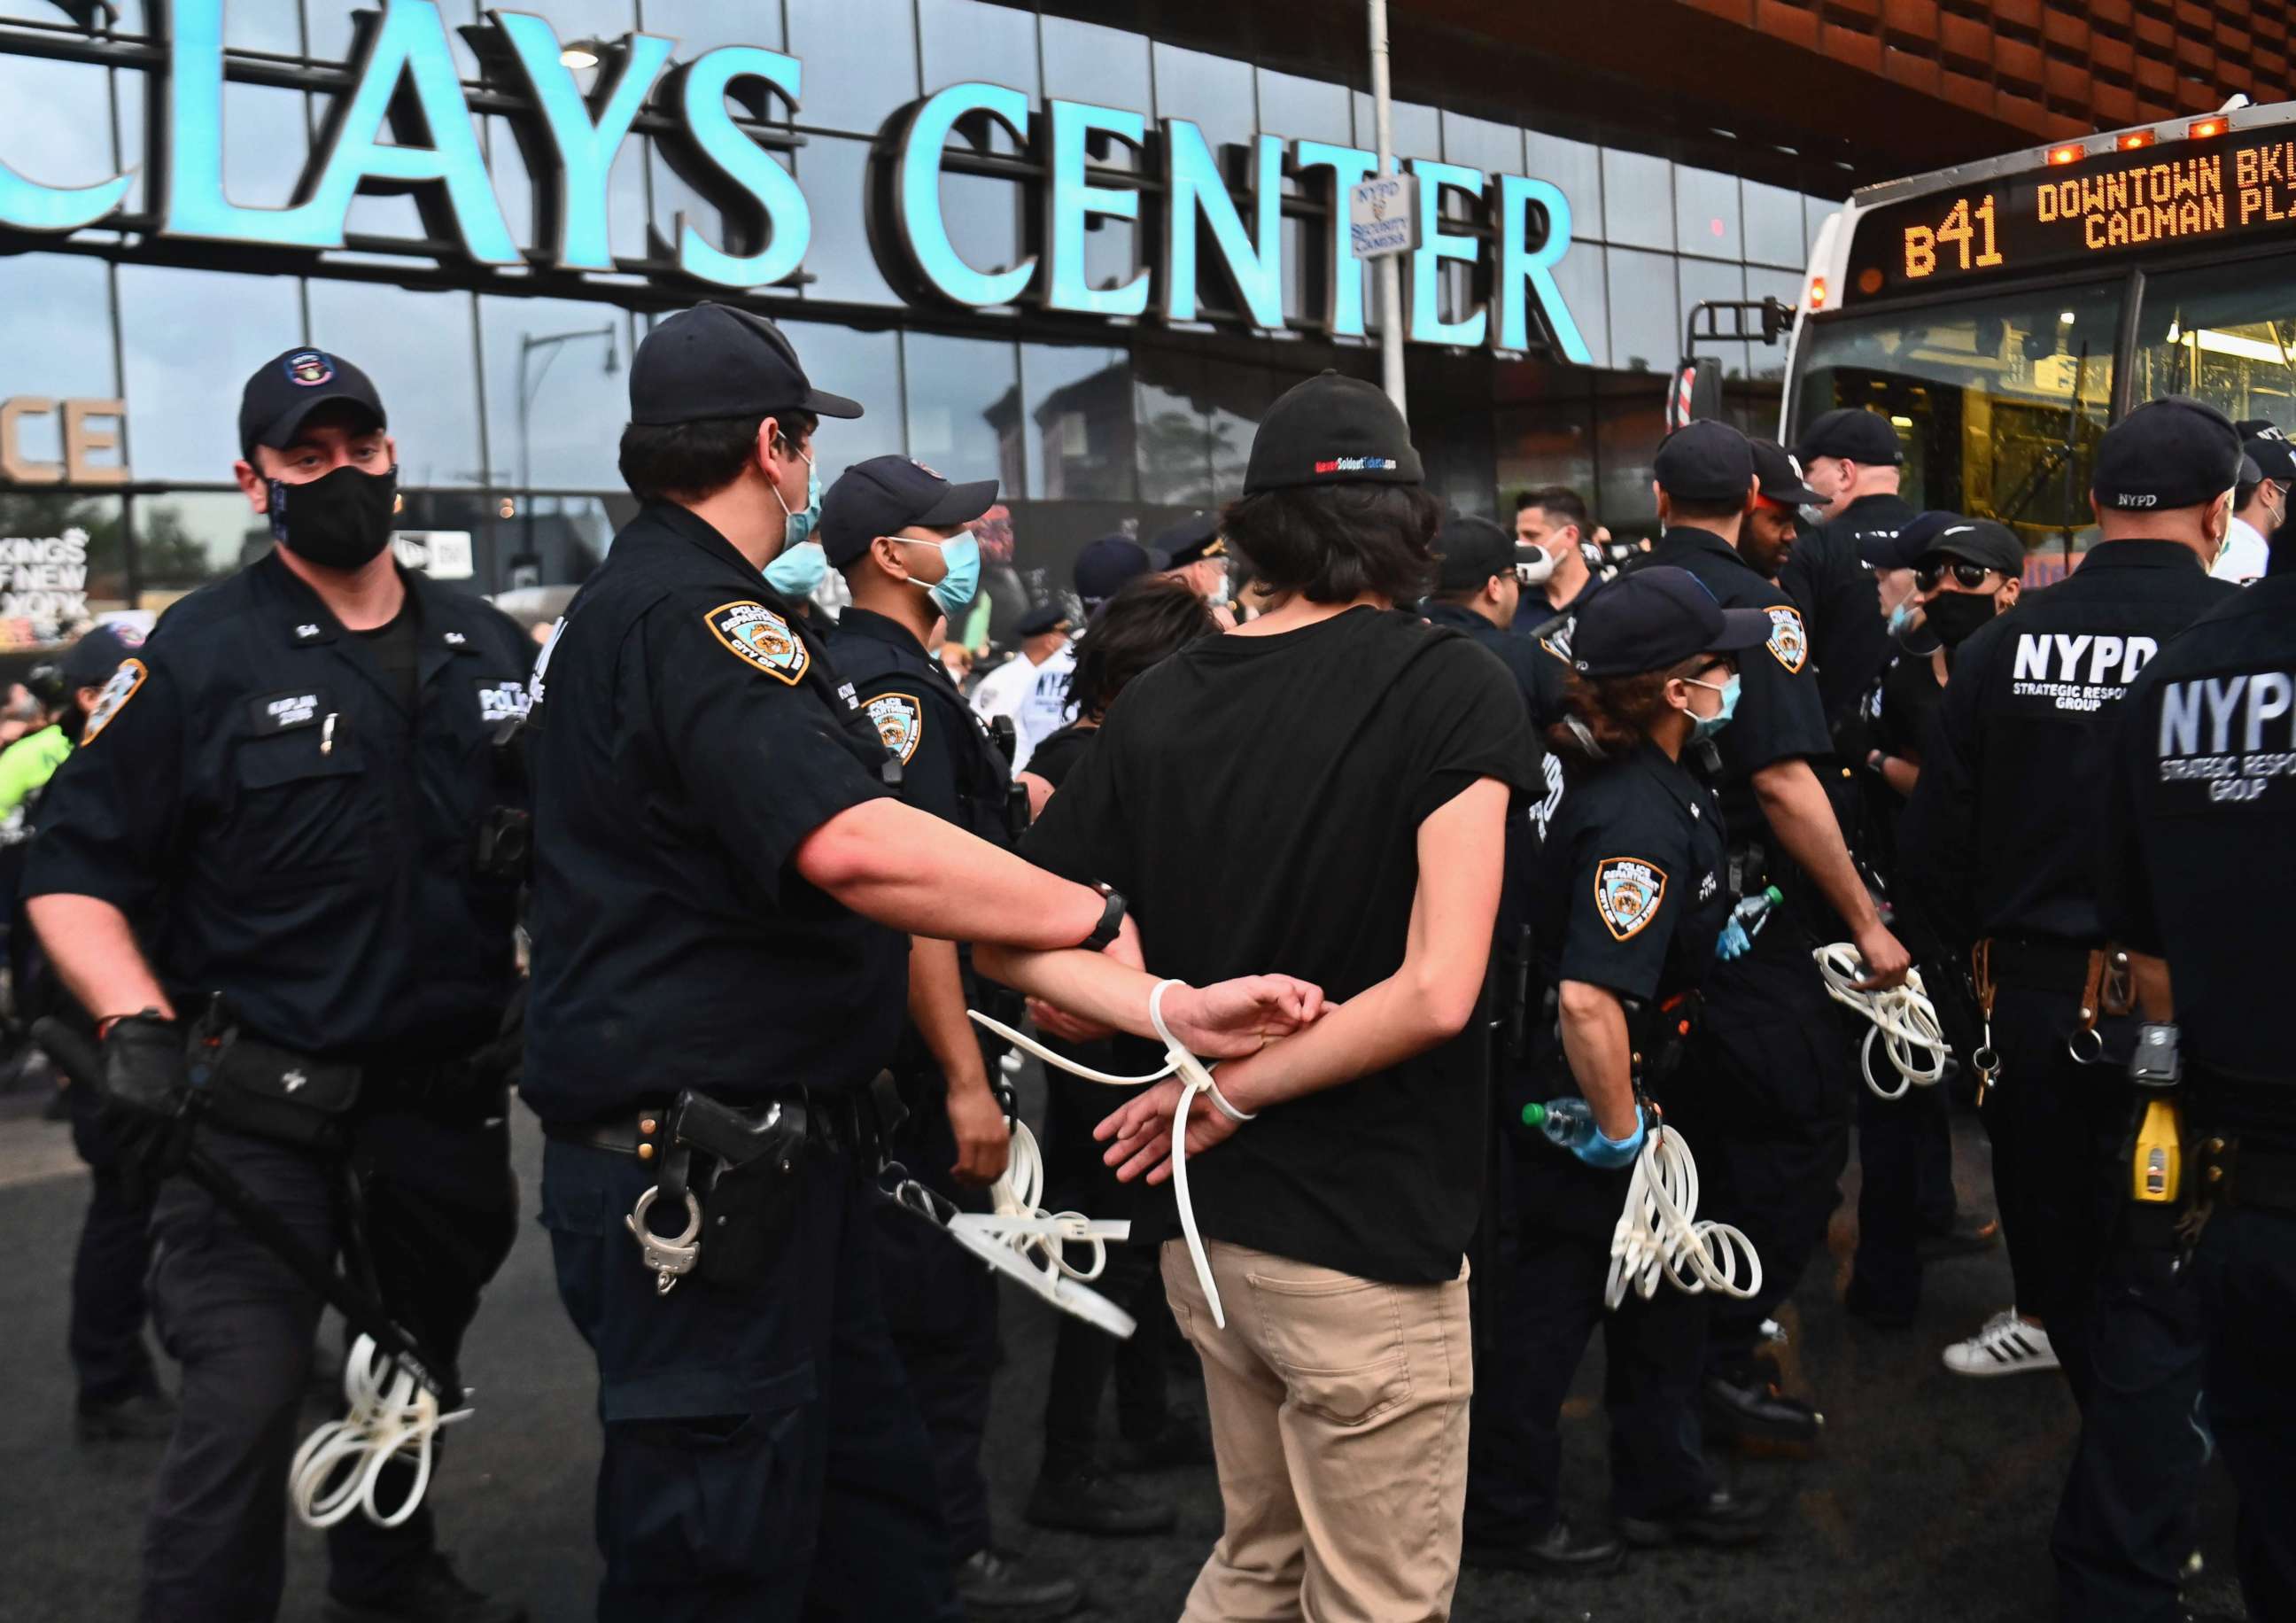 PHOTO: Police officers arrest a protester during a Black Lives Matter protest near Barclays Center on May 29, 2020, in the Brooklyn borough of New York.